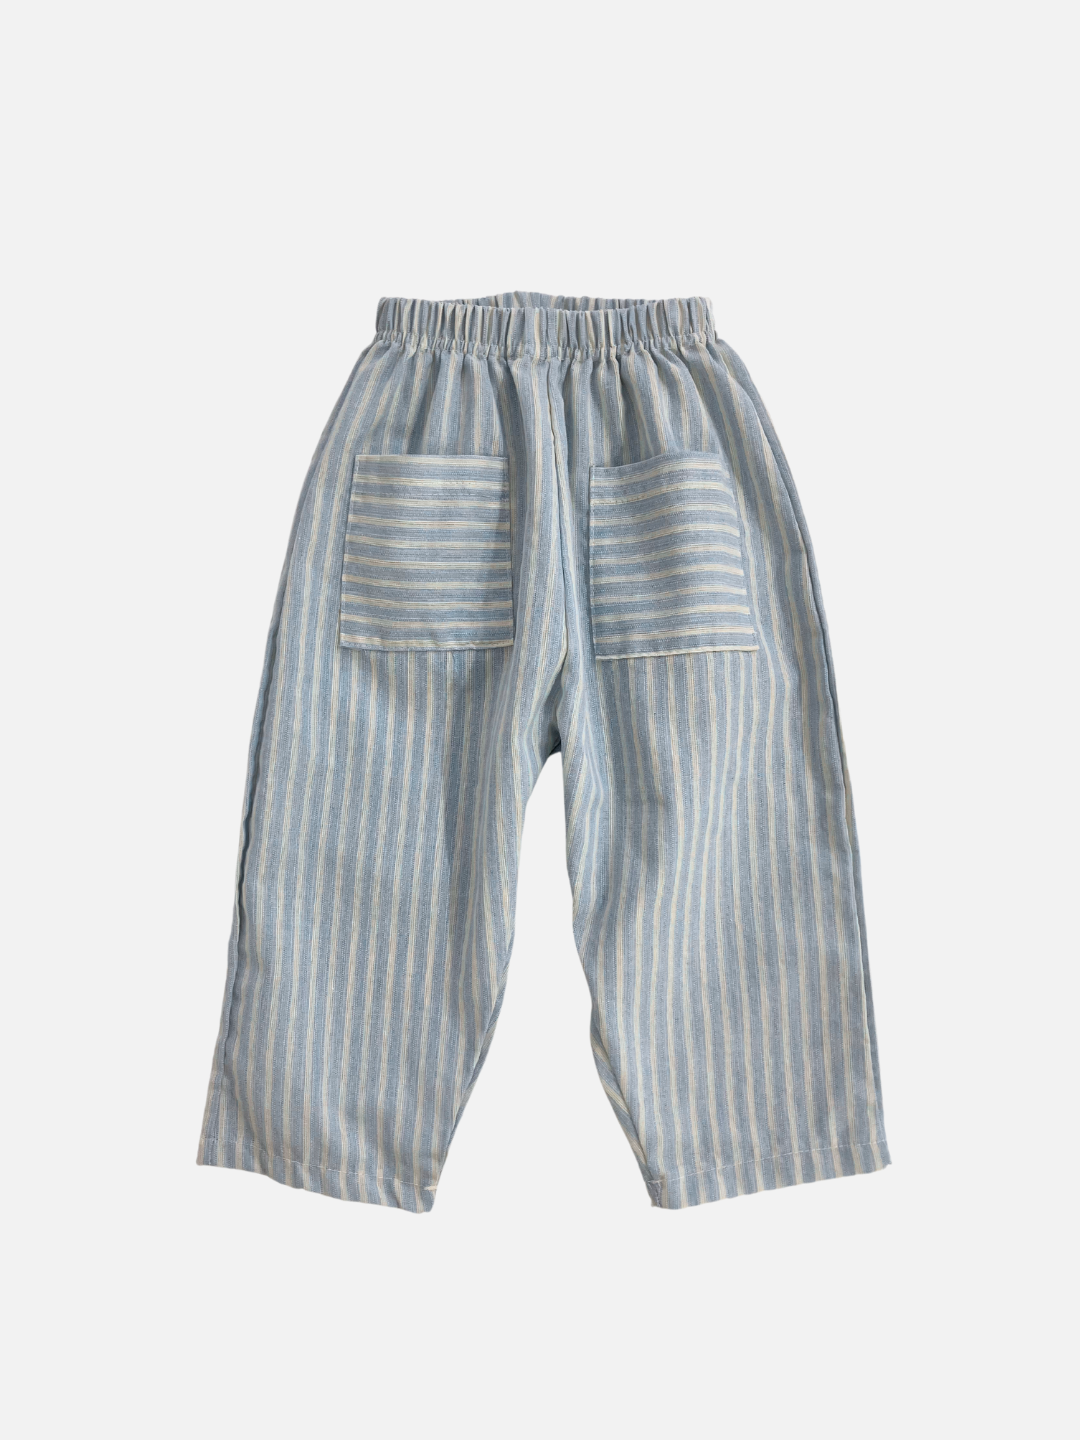 A front view of kids' Pocket Stripe Pant in 100% Cotton in light blue stripe